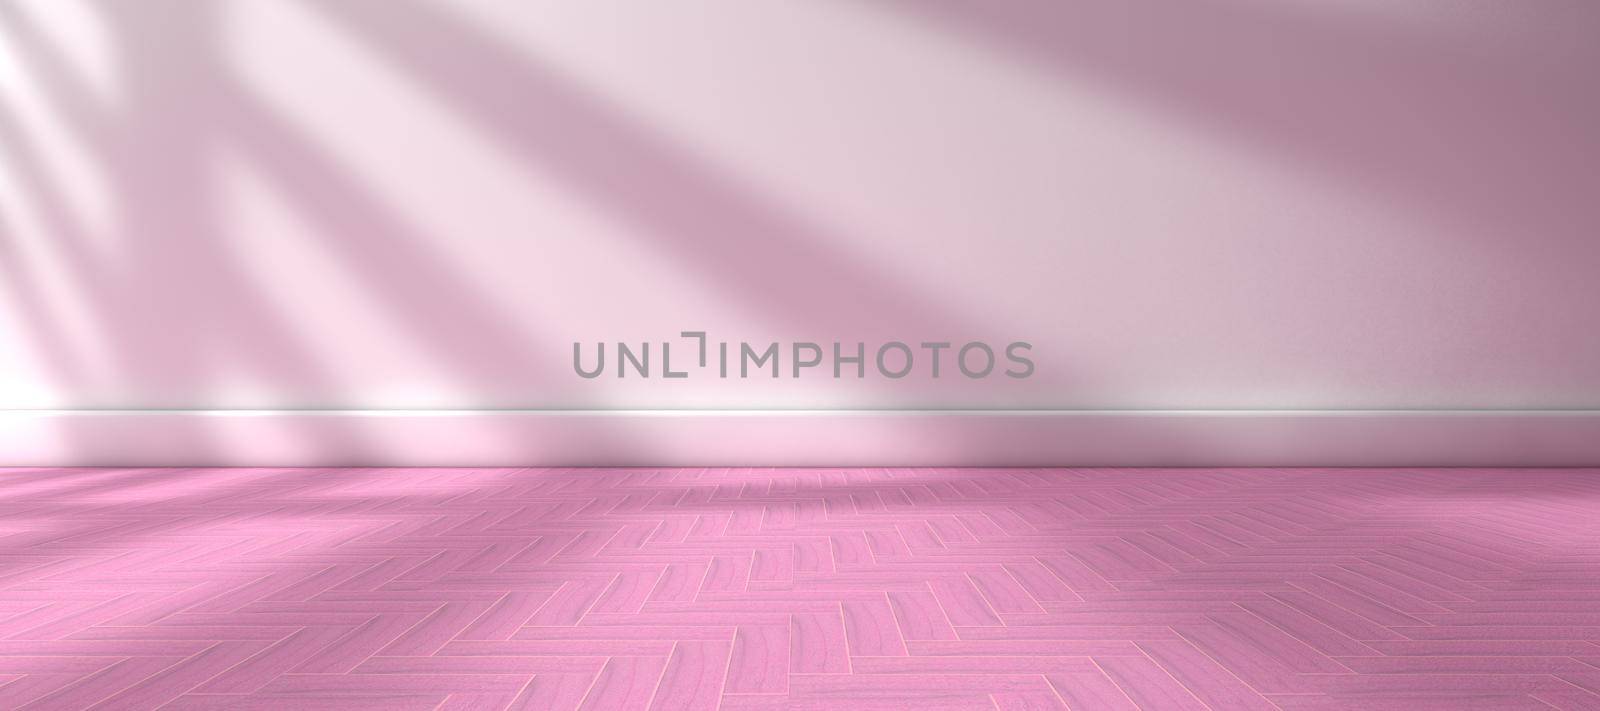 3d illustration.Empty room.Tile floor and white wall background.